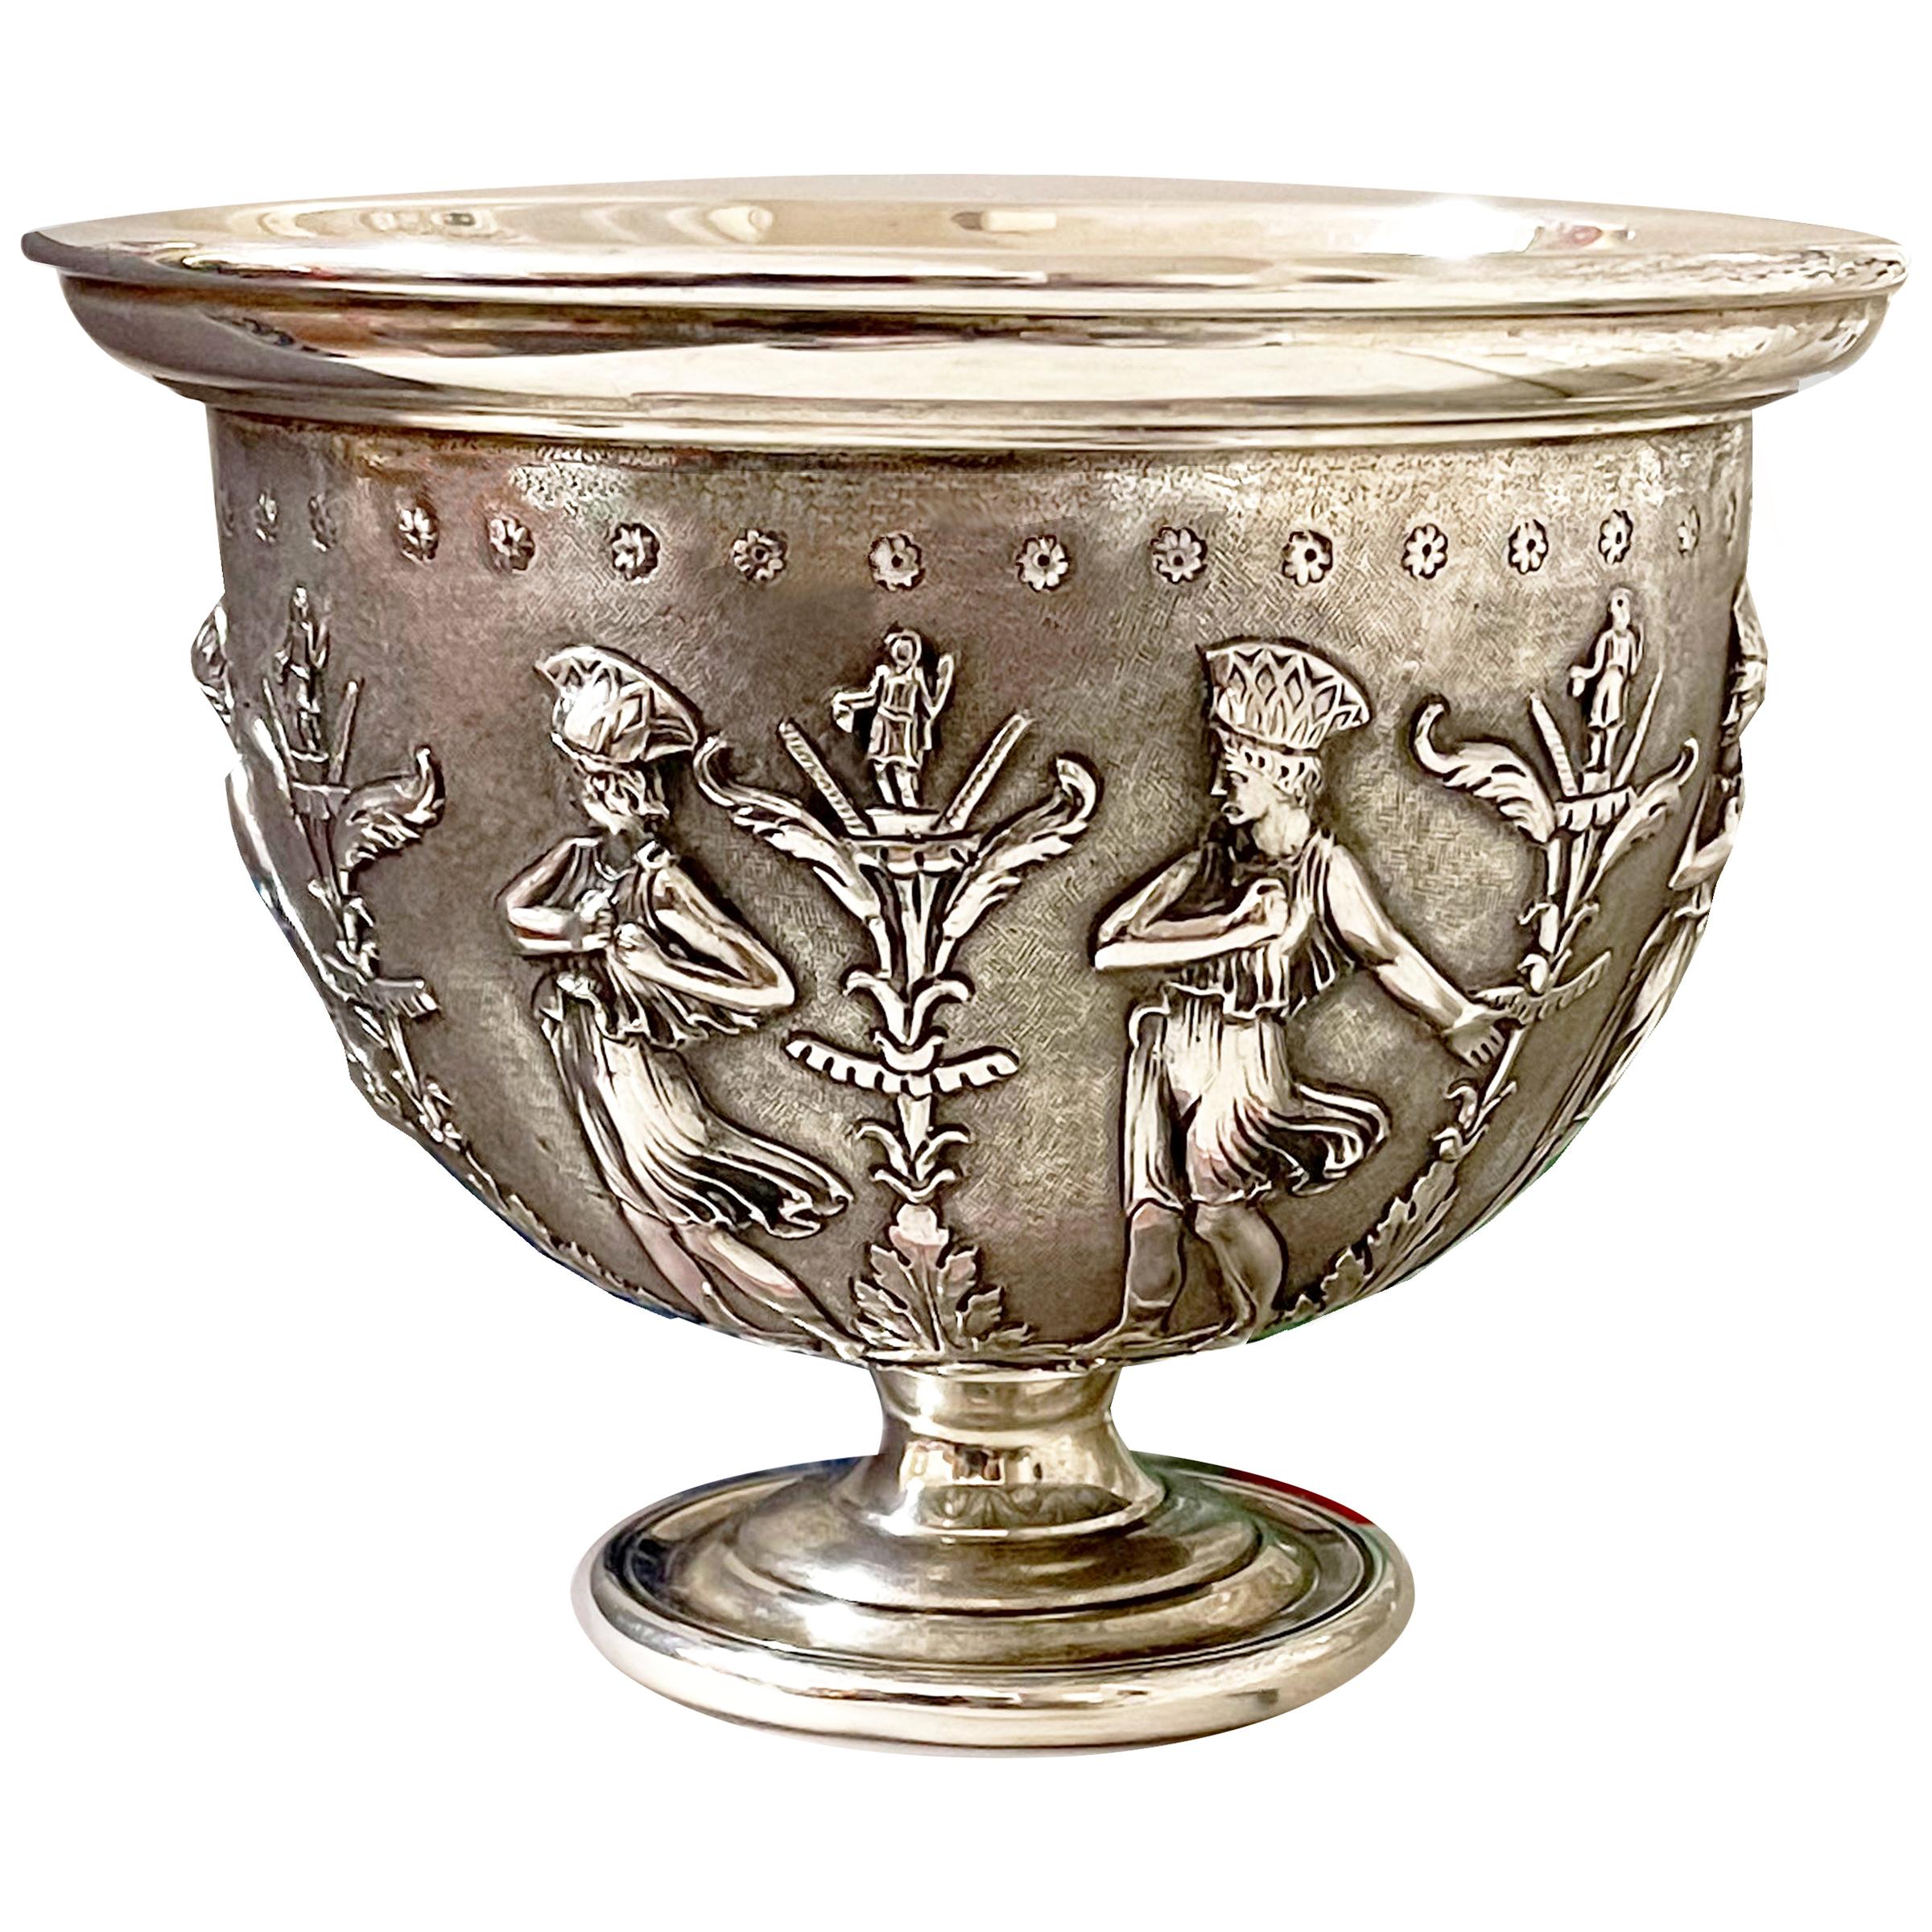 Handmade Sterling Silver Centerpiece Bowl Depicting Cybele, '20th Century'